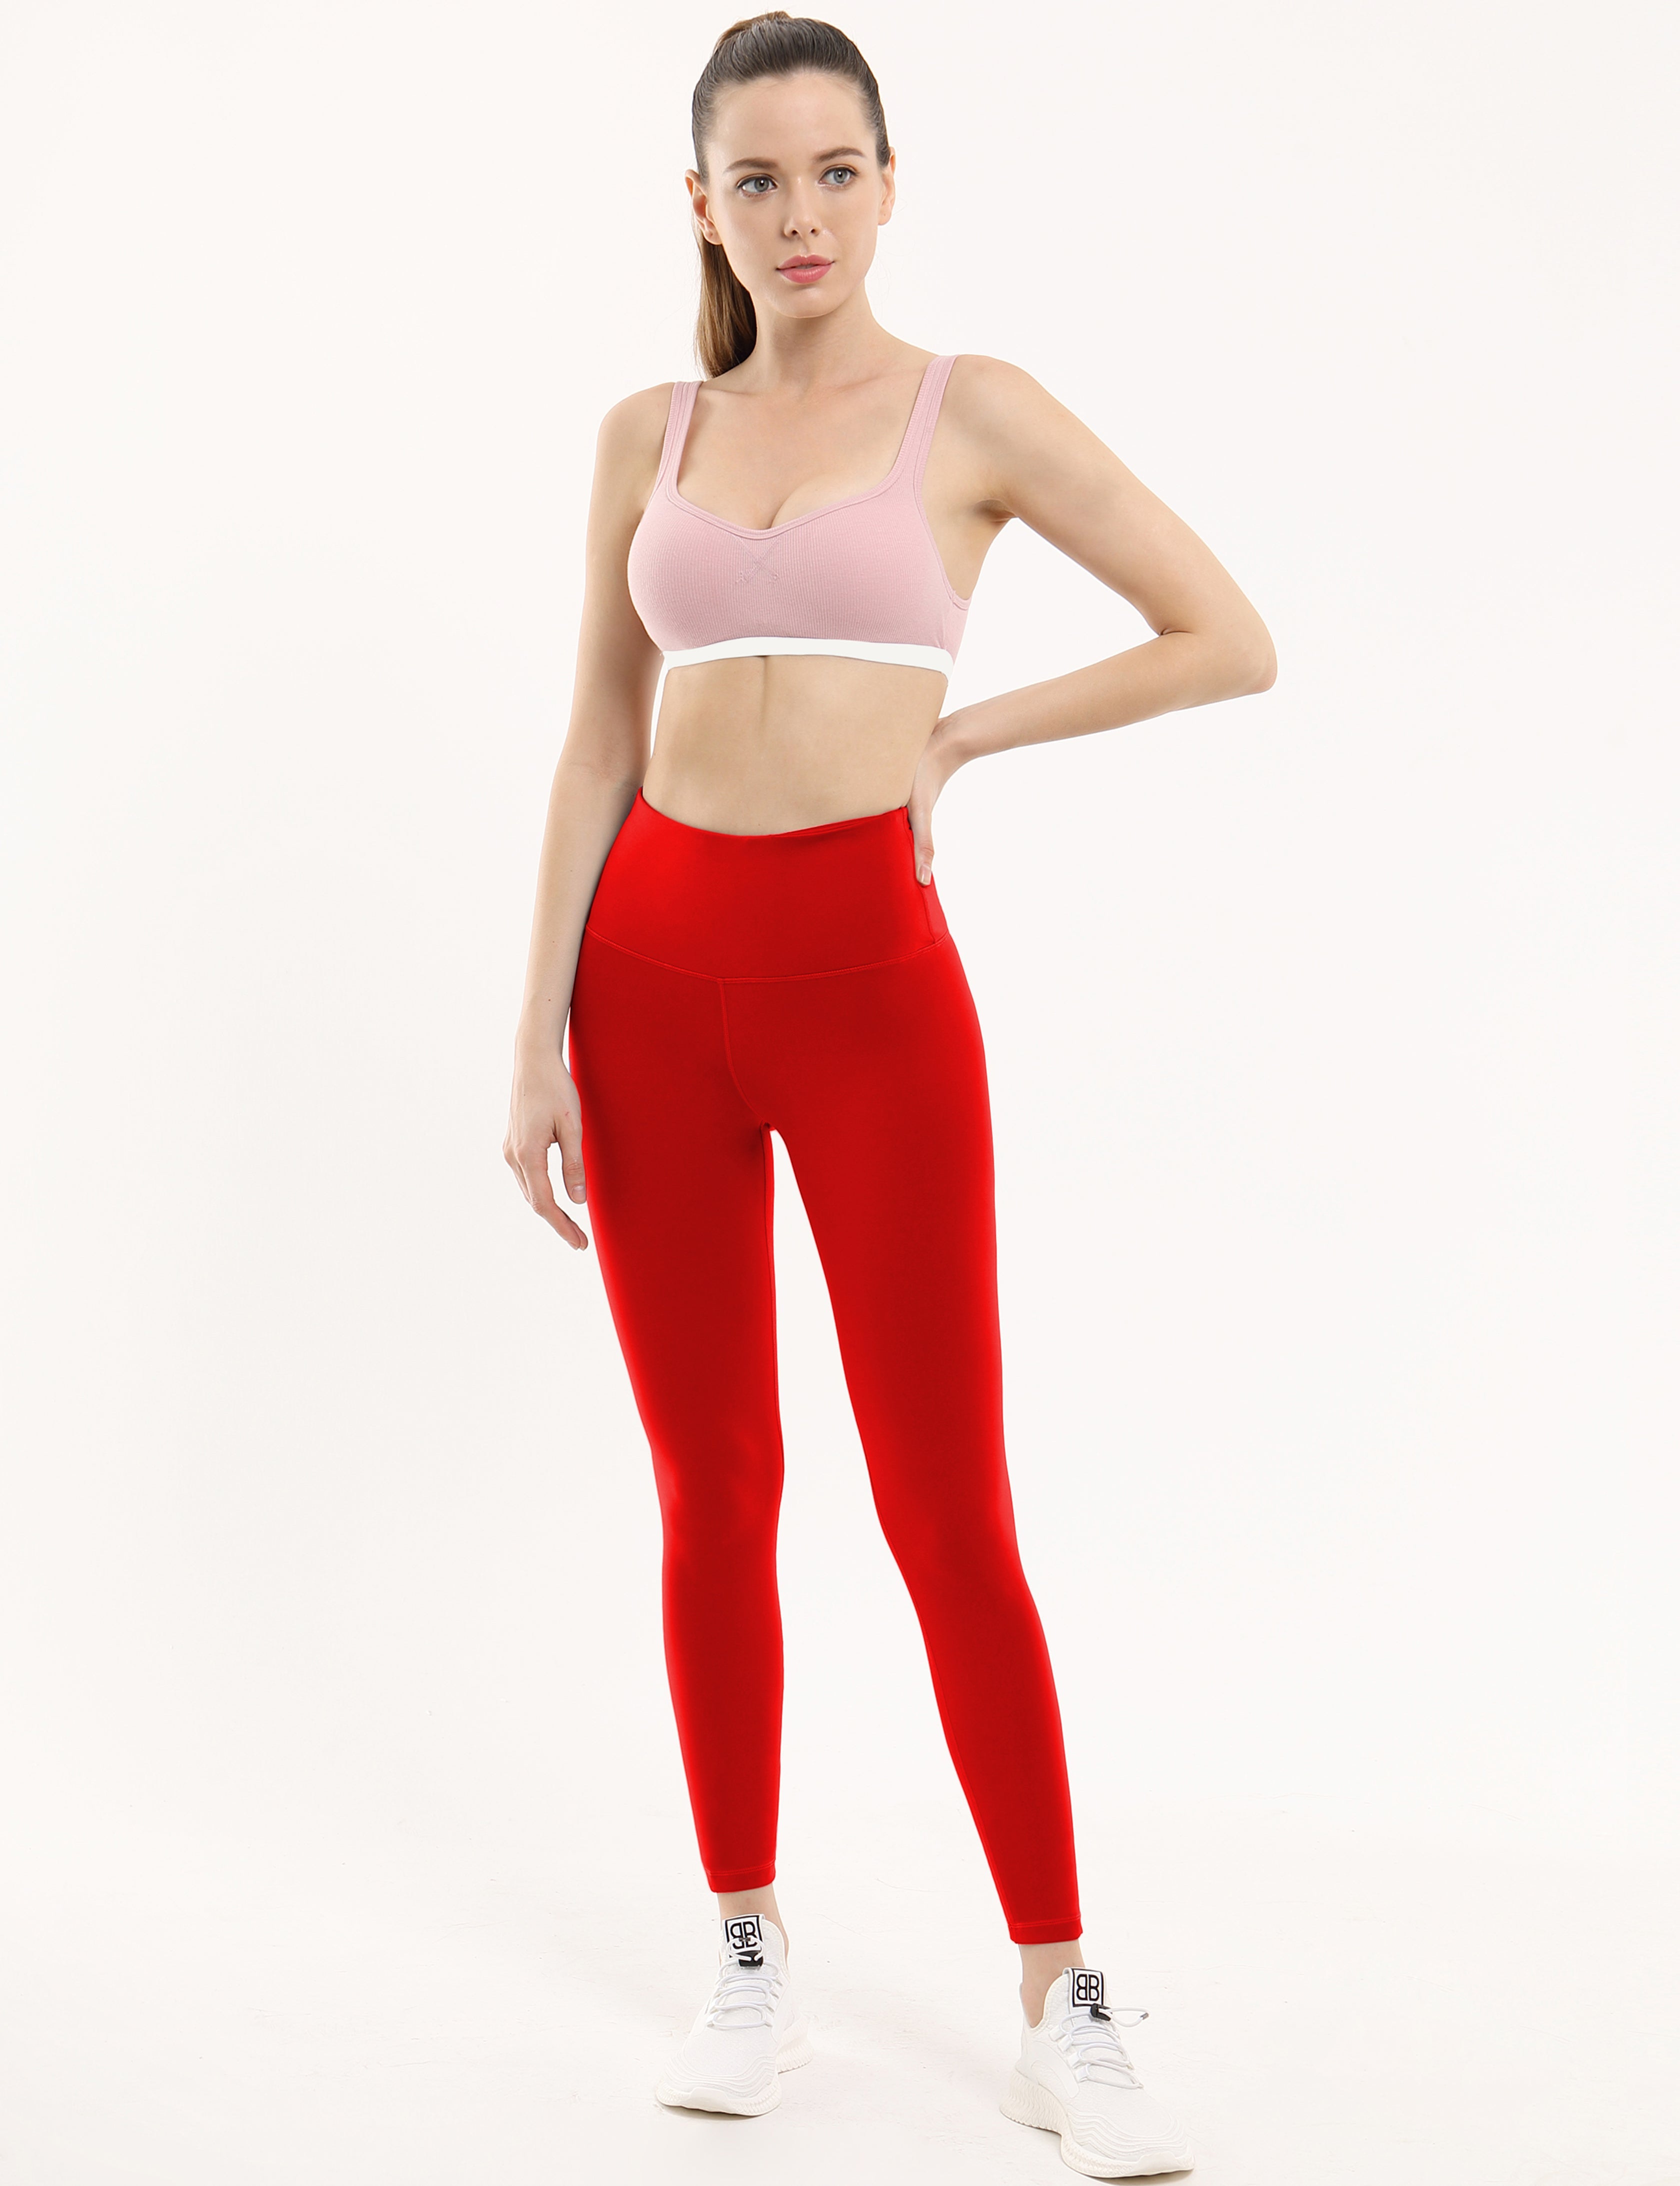 High Waist Jogging Pants scarlet 75%Nylon/25%Spandex Fabric doesn't attract lint easily 4-way stretch No see-through Moisture-wicking Tummy control Inner pocket Four lengths